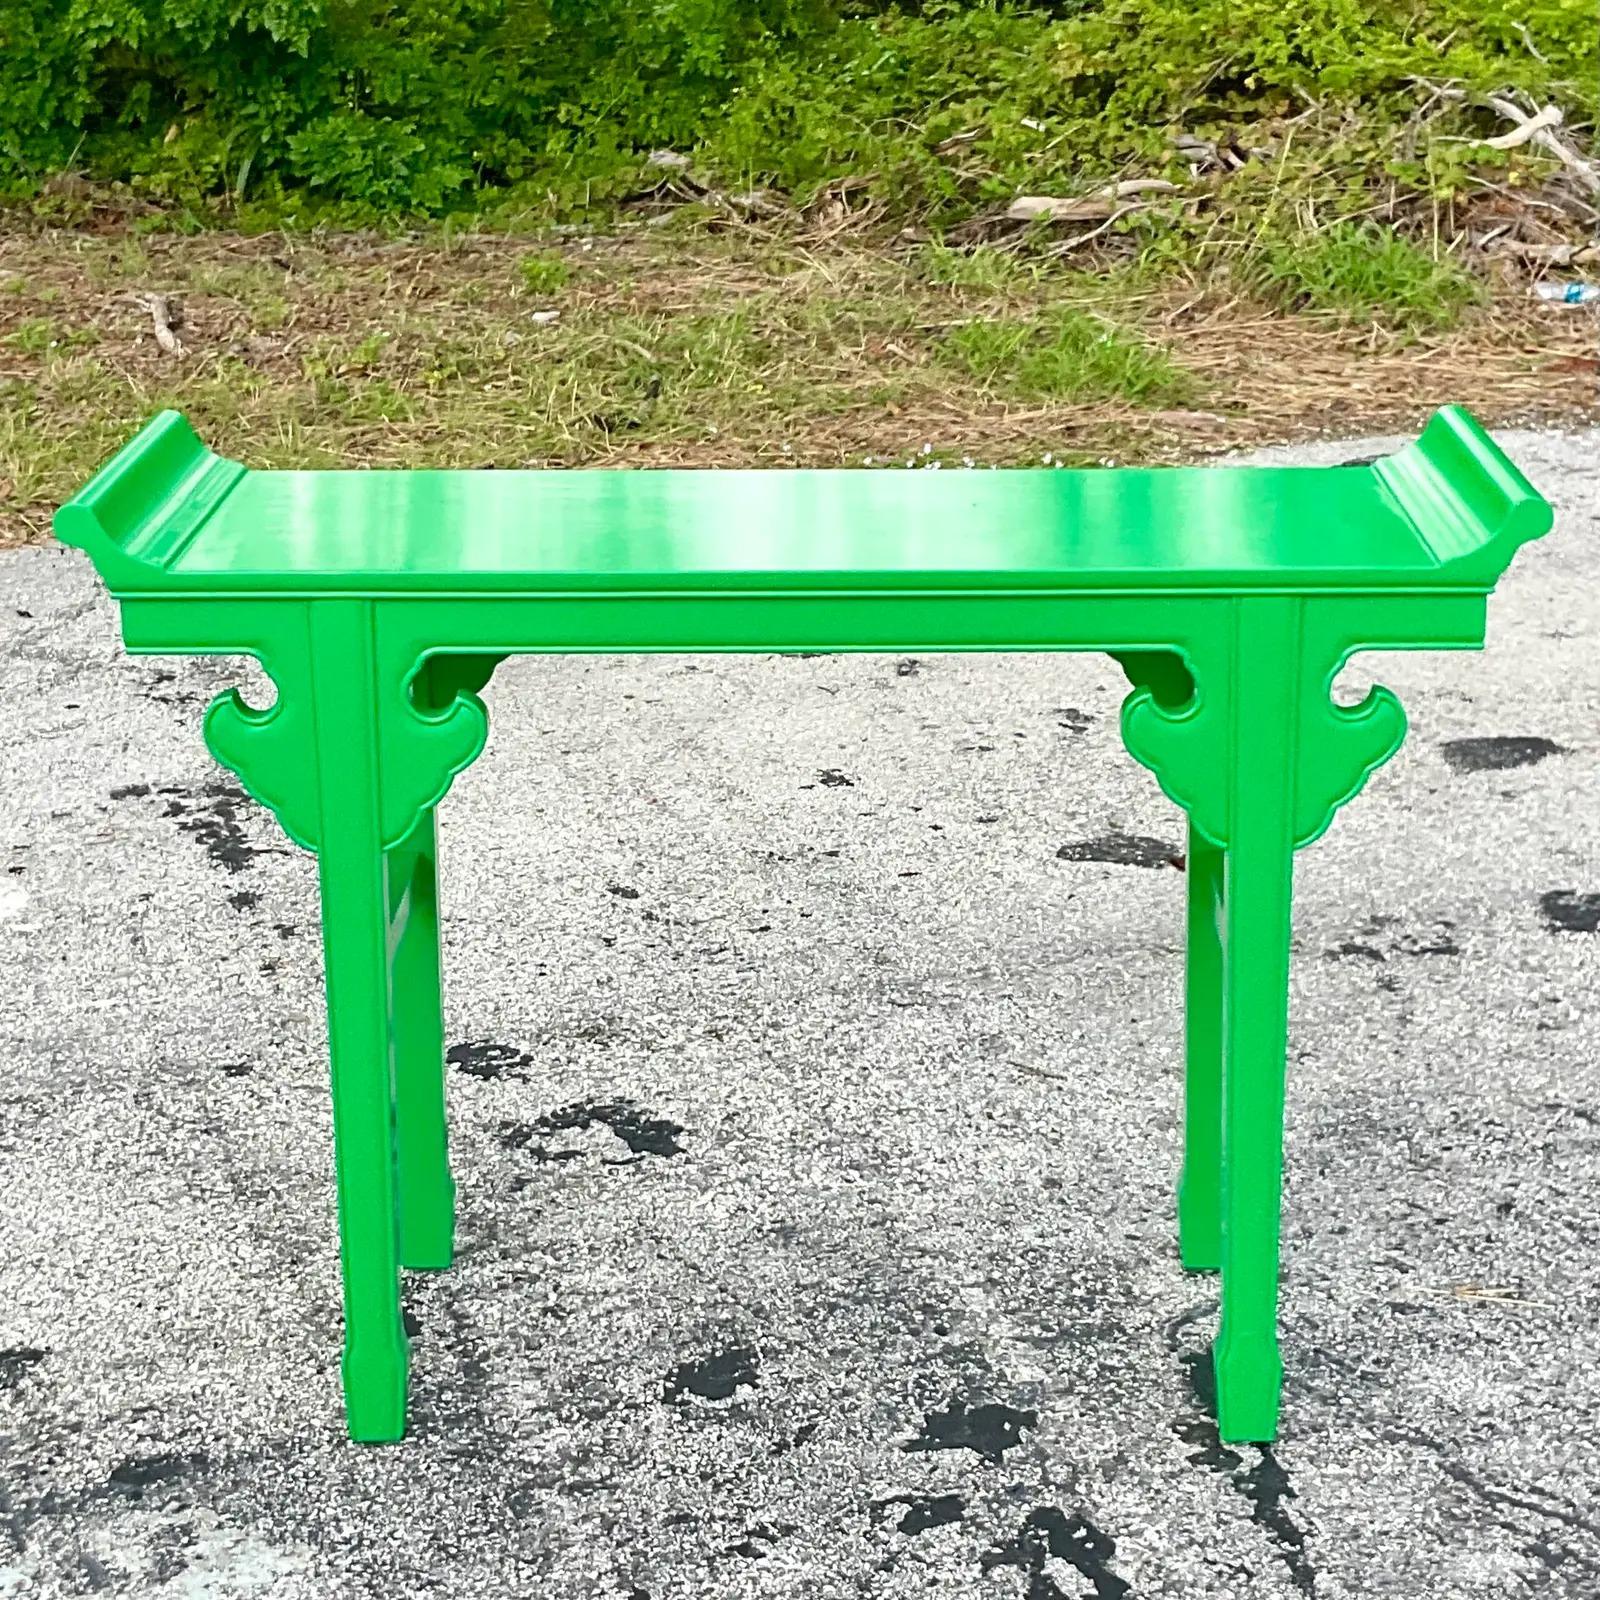 A fantastic vintage Asian console table. A brilliant Kelly green sent I gloss lacquered finish on a classic pagoda design. Sure to add a flash of drama to any space. Acquired from a Palm Beach estate.